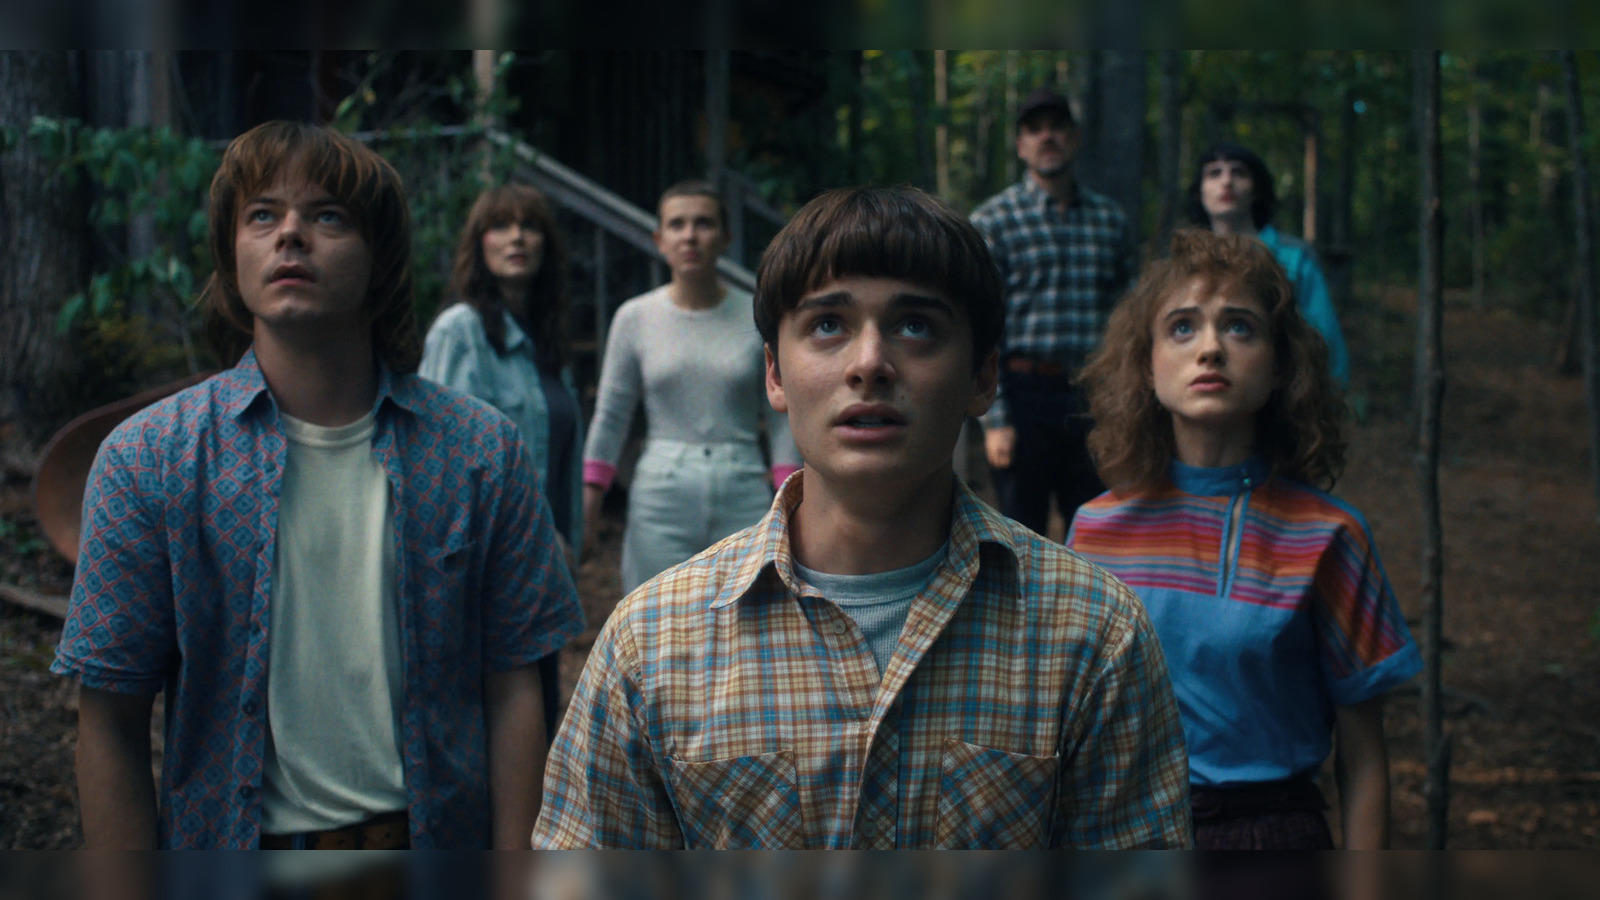 Stranger Things season 4: Netflix has released the official